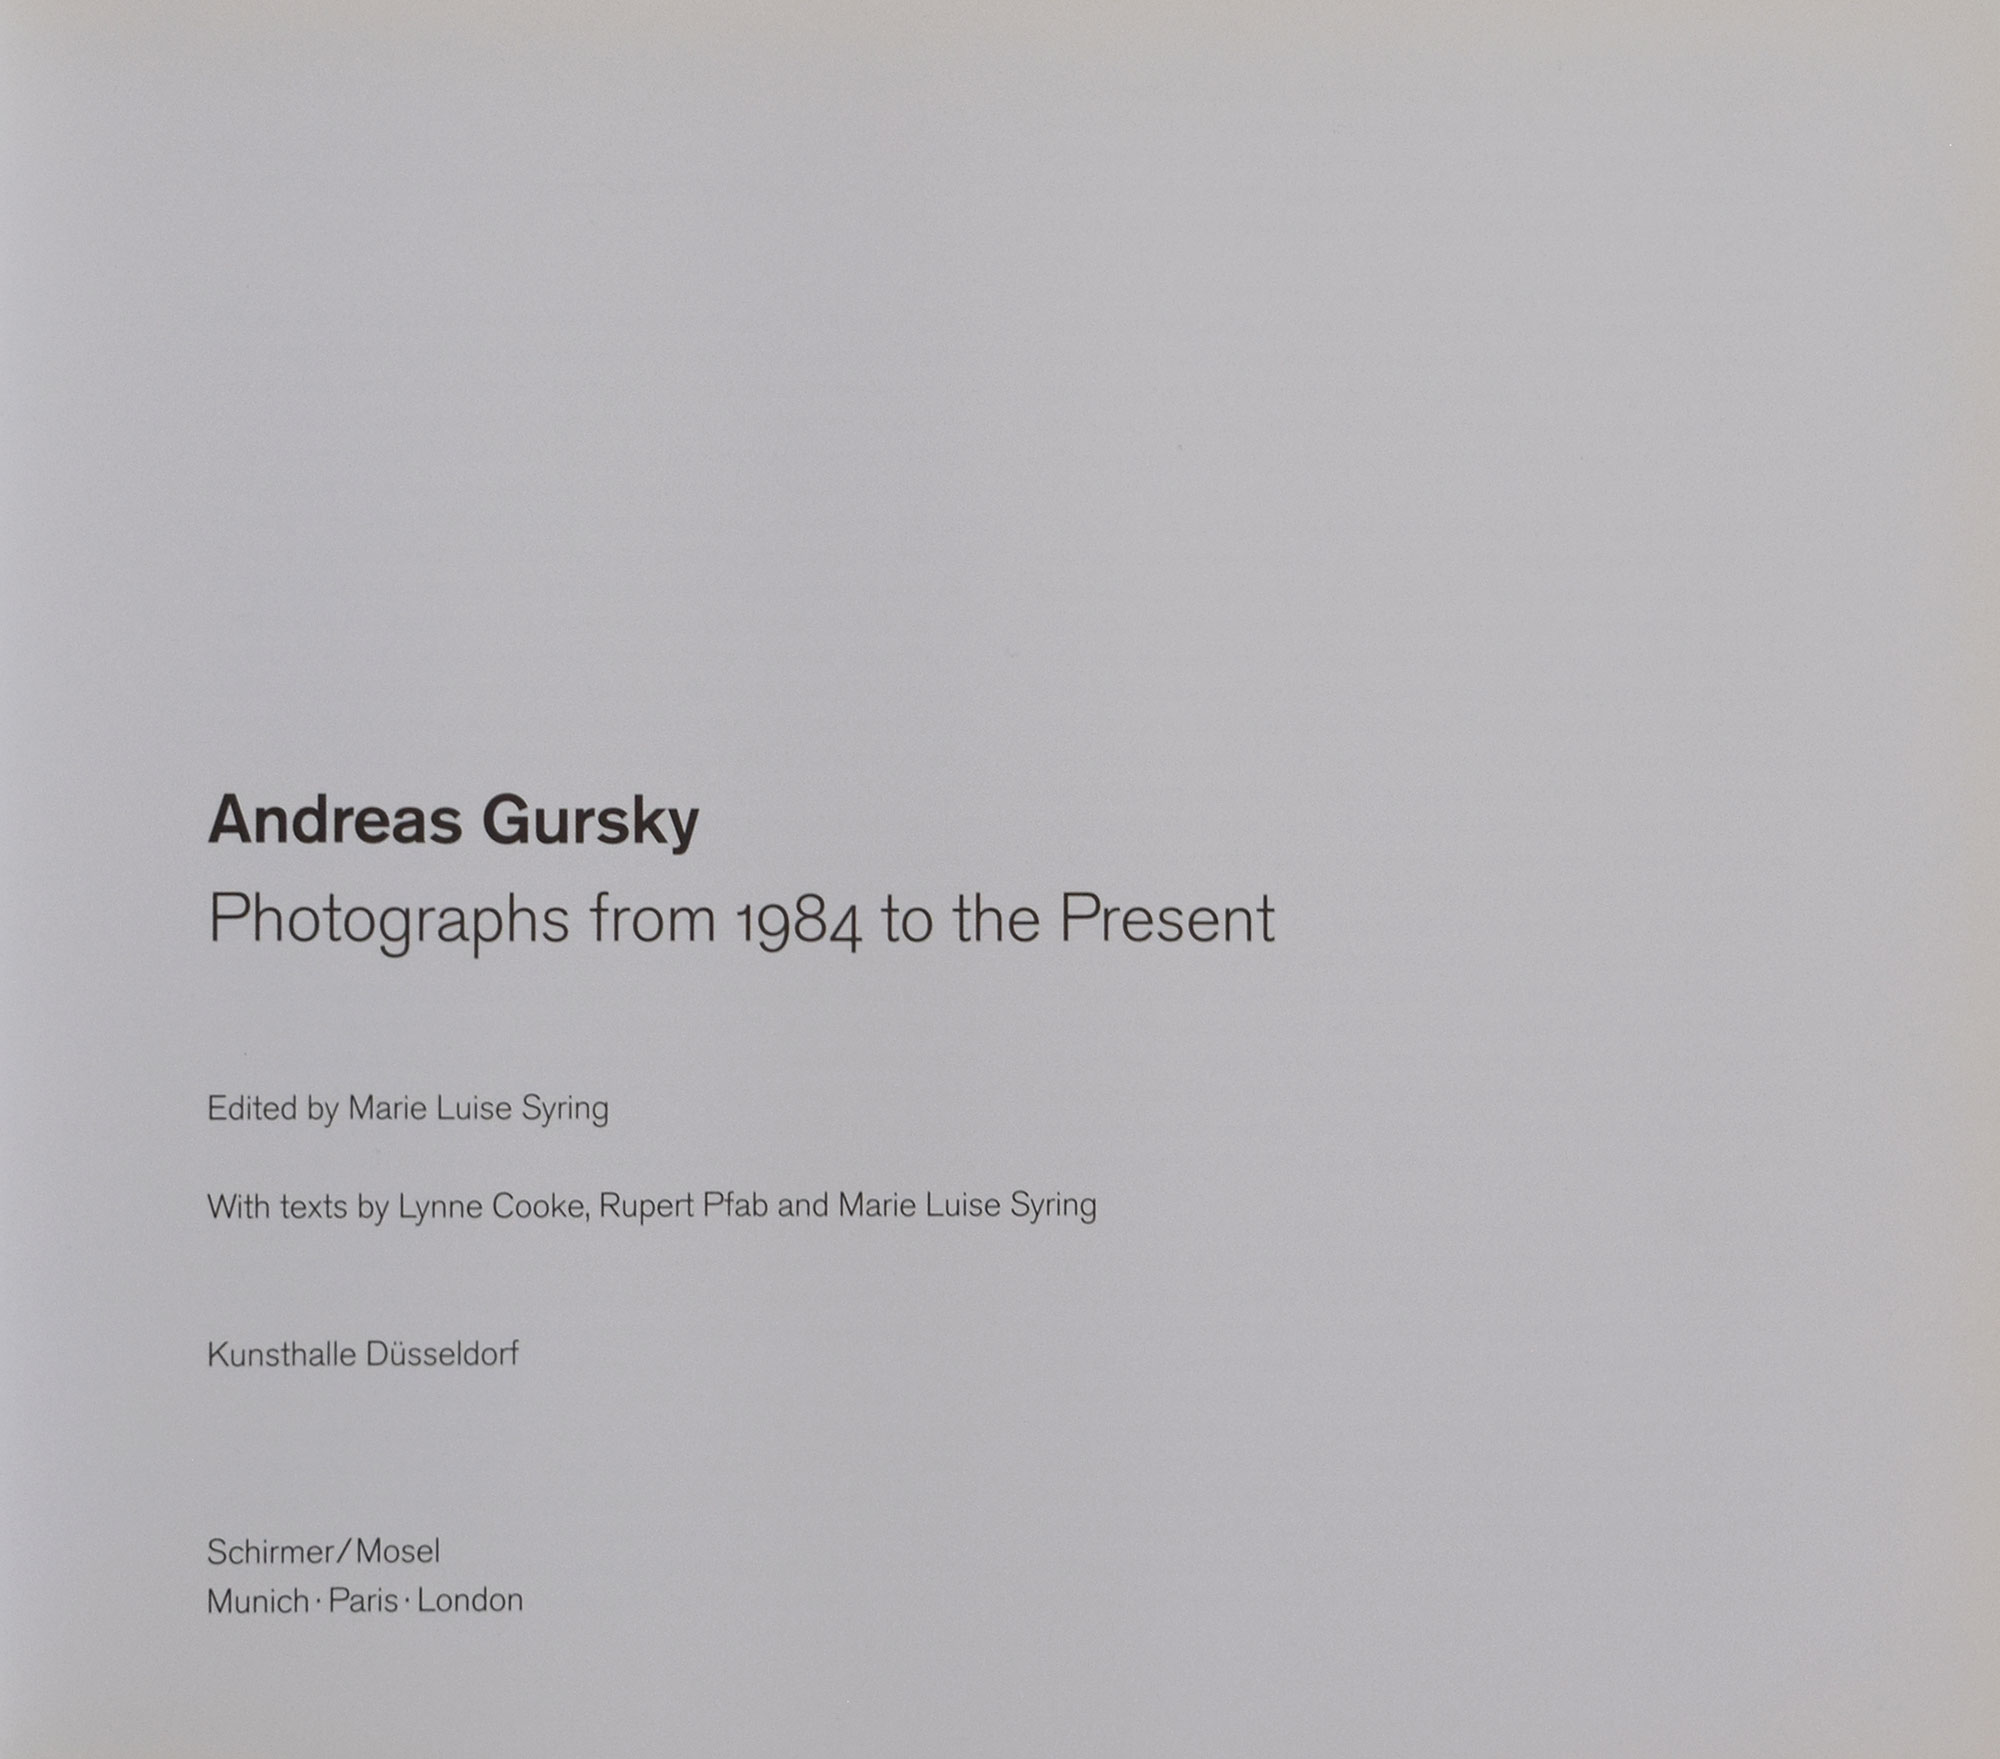 Andreas Gursky. Photographs from 1984 to the Present